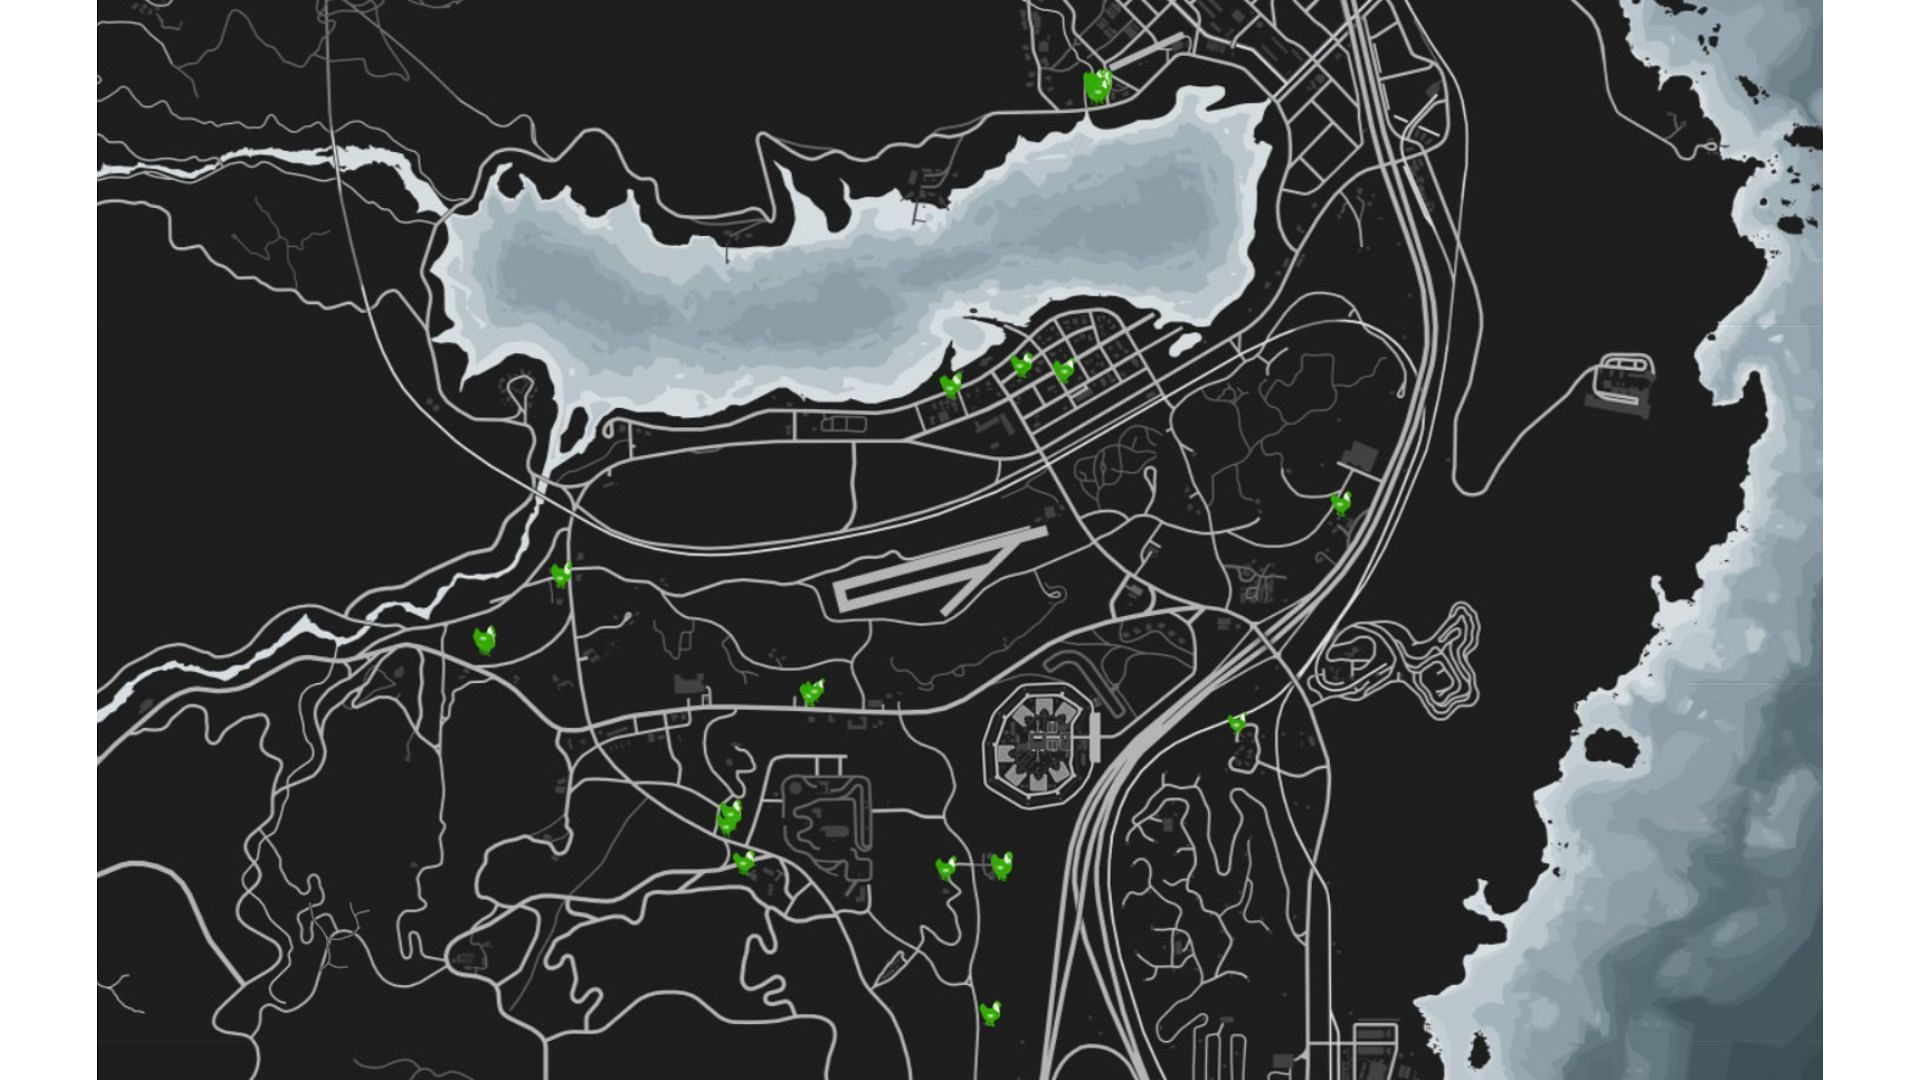 Grand Theft Auto Online Hen locations in Sandy Shores and Grapeseed (Image via GTAWeb.eu)